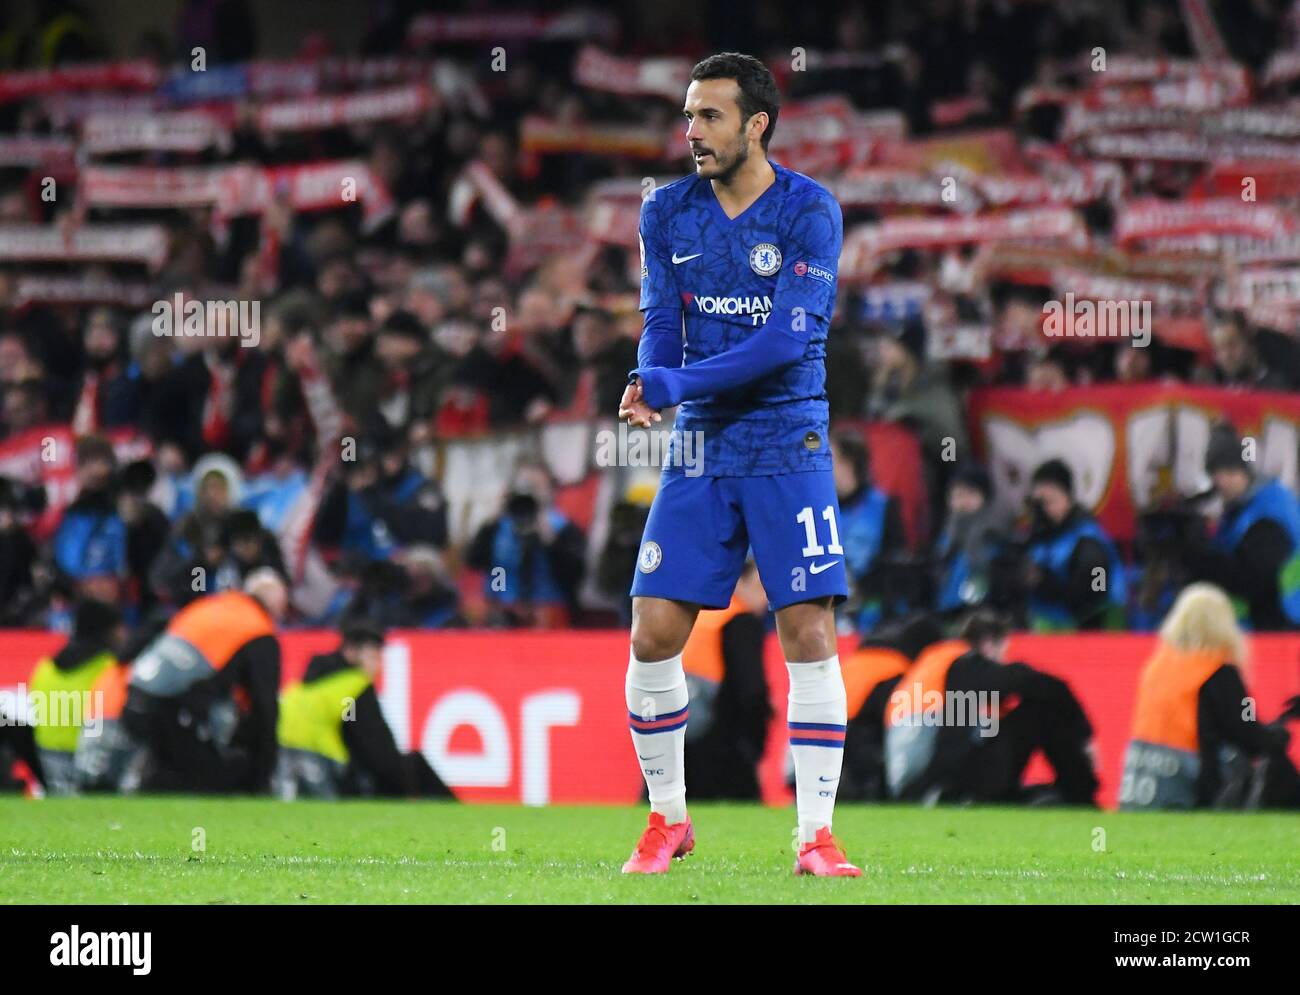 LONDON, ENGLAND - FEBRUARY 26, 2020: Pedro Eliezer Rodriguez Ledesma of Chelsea pictured during the 2019/20 UEFA Champions League Round of 16 game between Chelsea FC and Bayern Munich at Stamford Bridge. Stock Photo